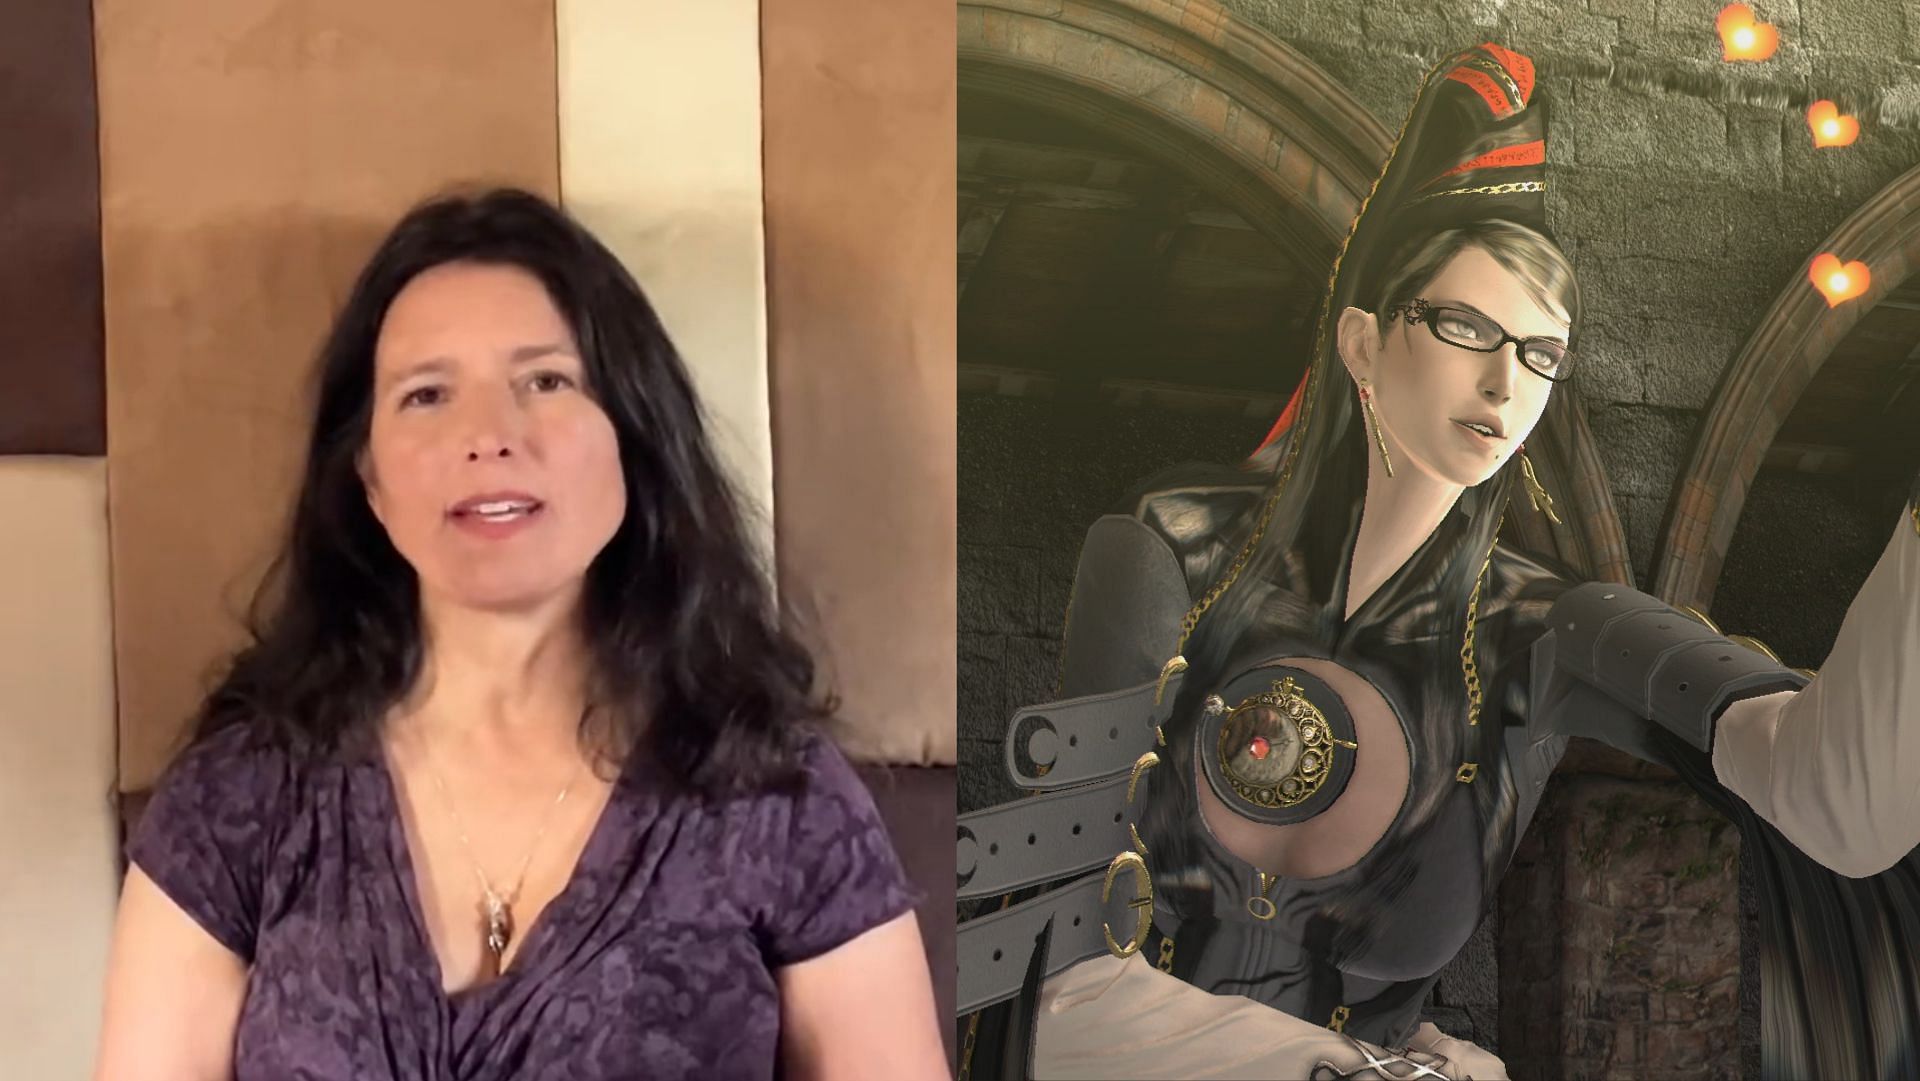 Bayonetta English voice actor Hellena Taylor calls out PlatinumGames, says  was offered $4K to voice character